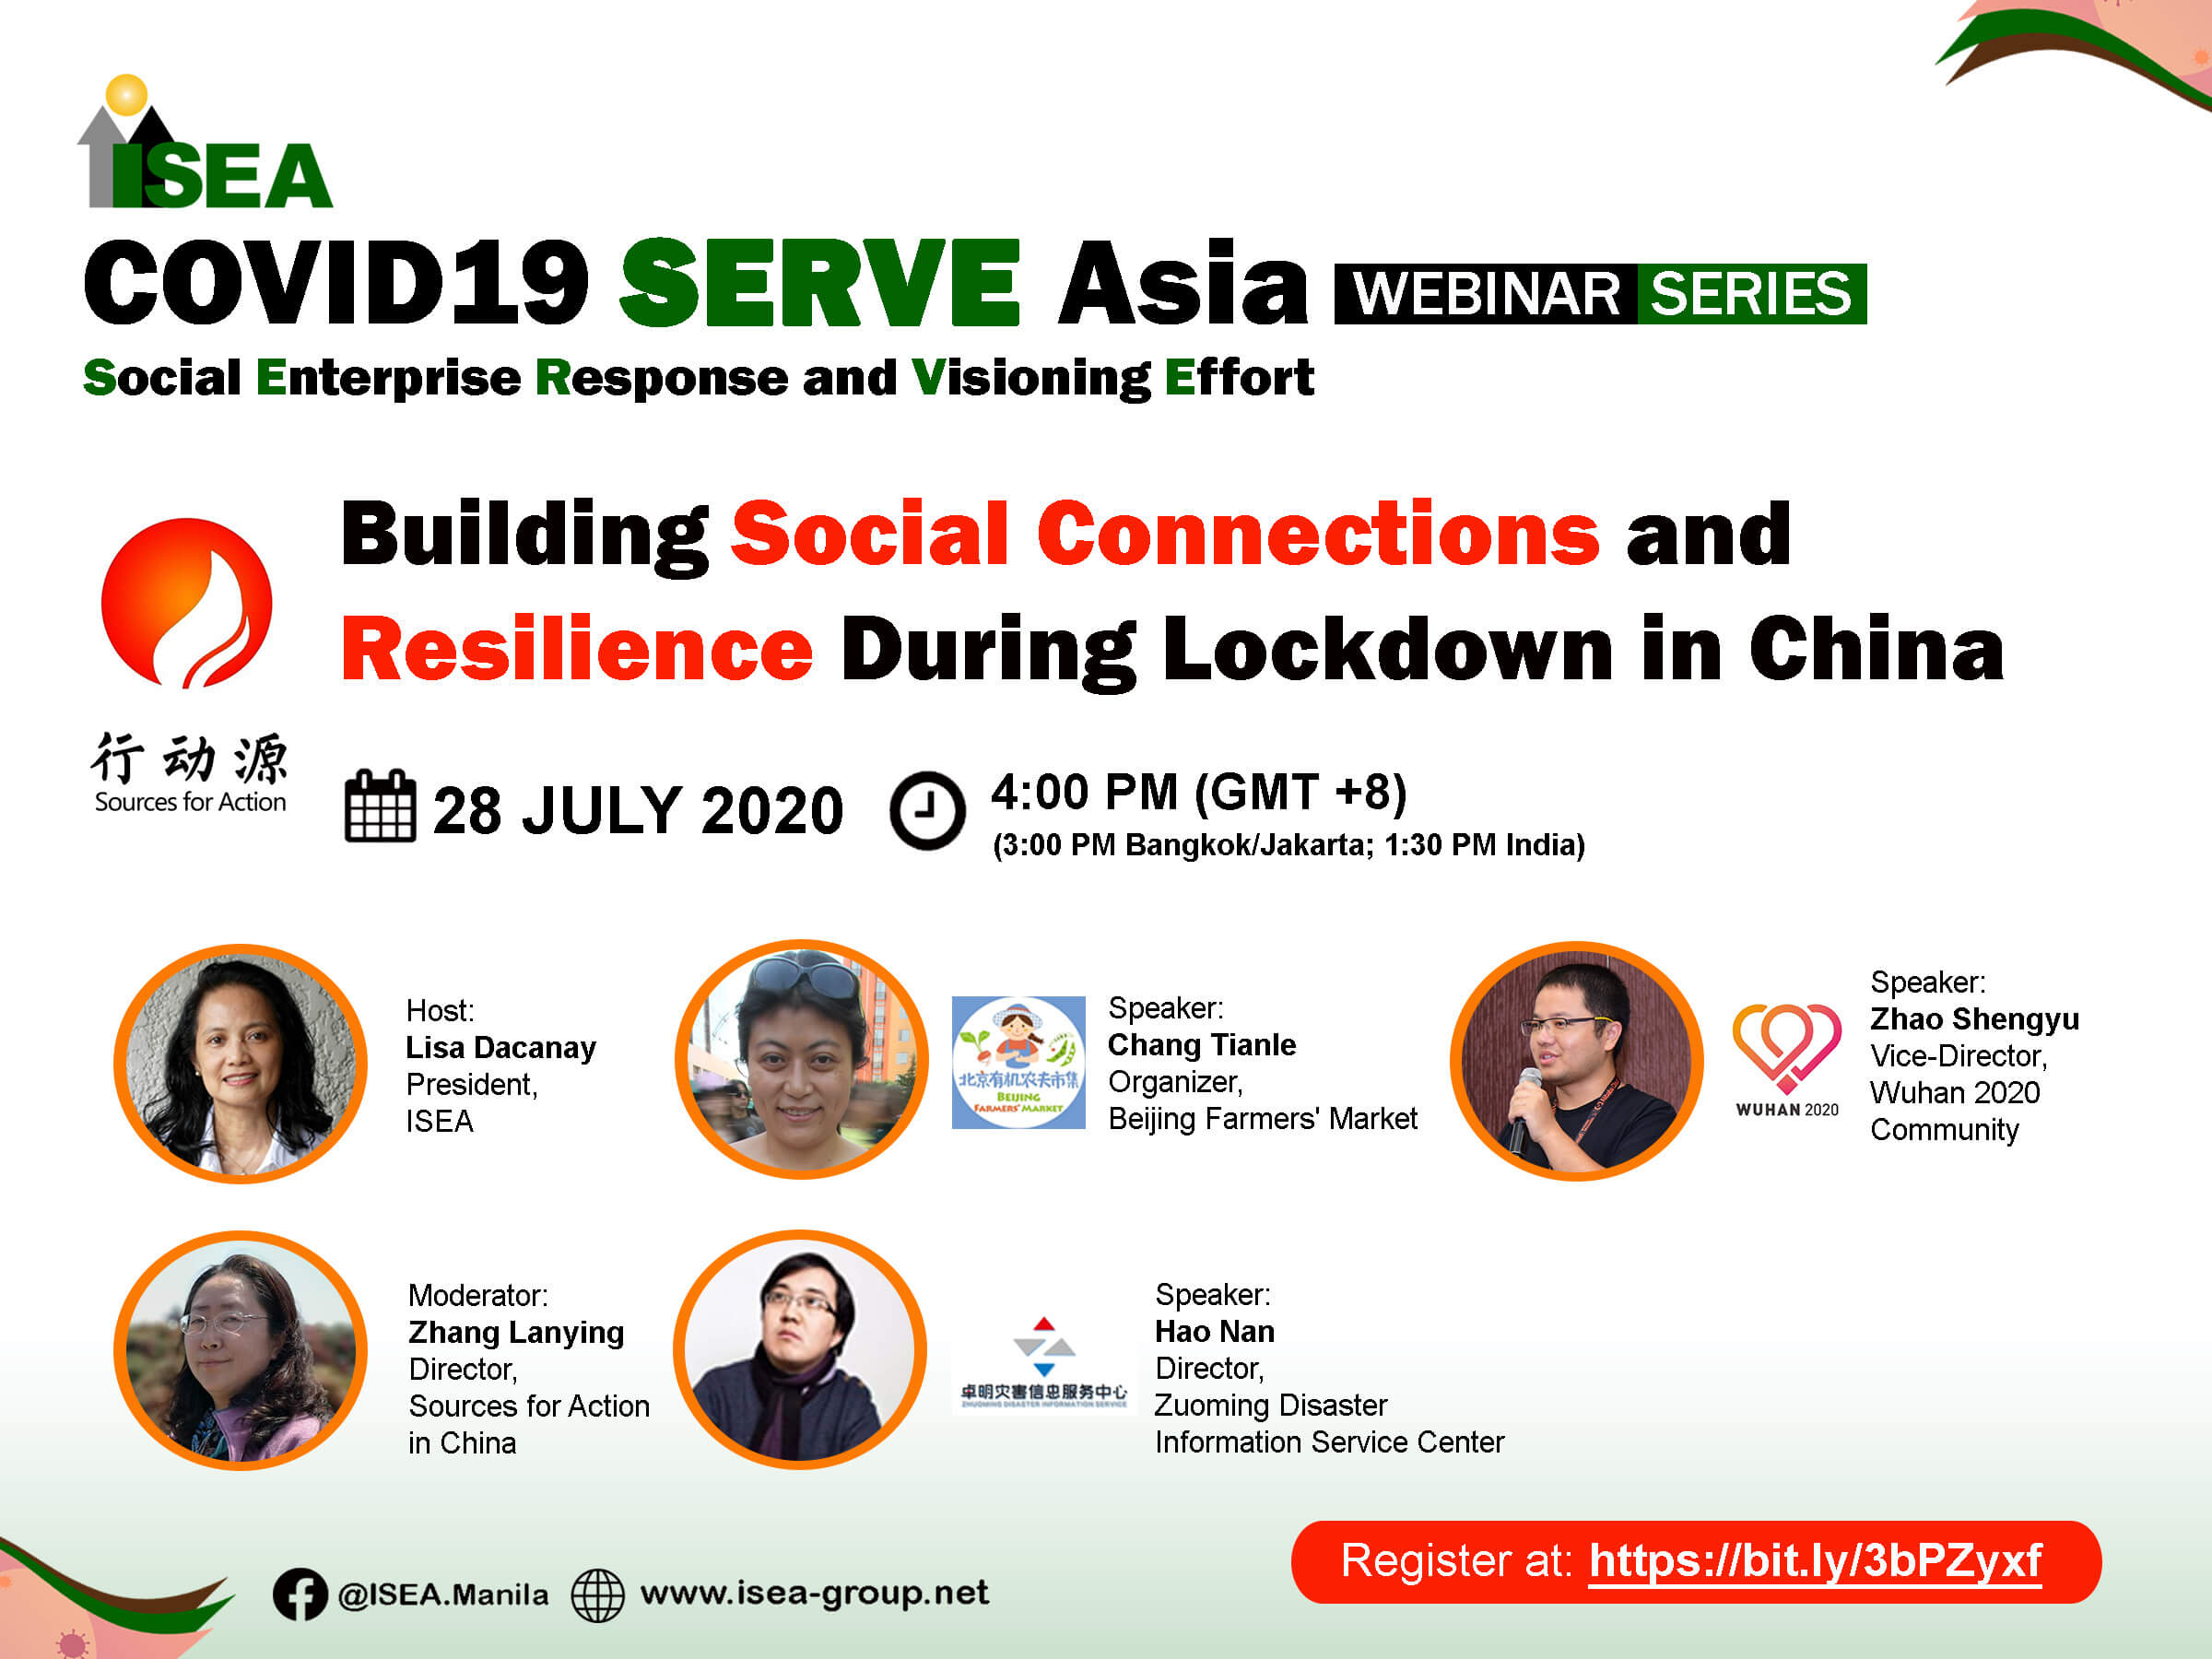 COVID SERVE Asia Webinar: Building Social Connections and Resilience During Lockdown in China